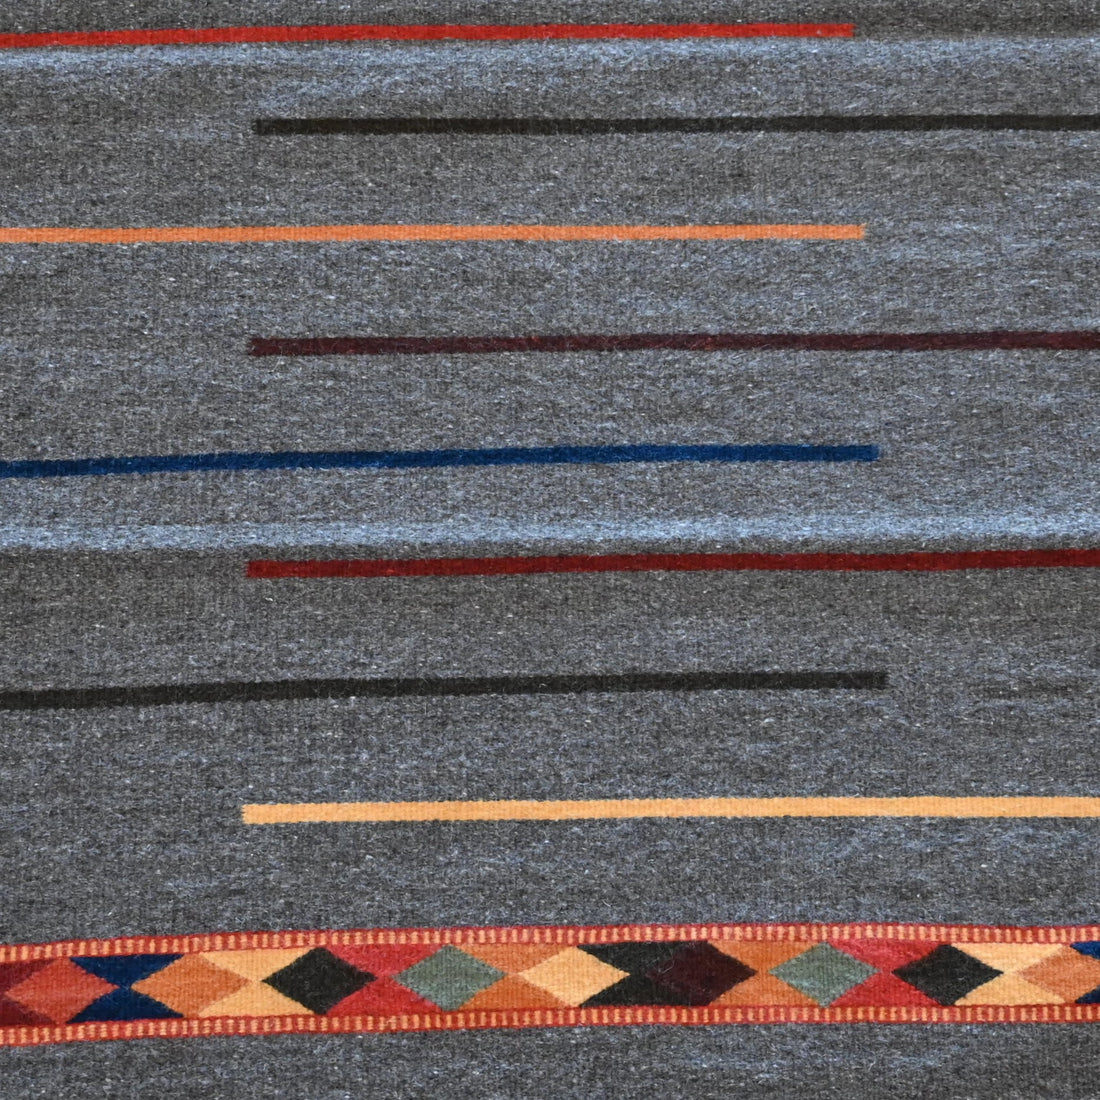 Escalante Rugs Hand Woven by Maritza Montano view of pattern